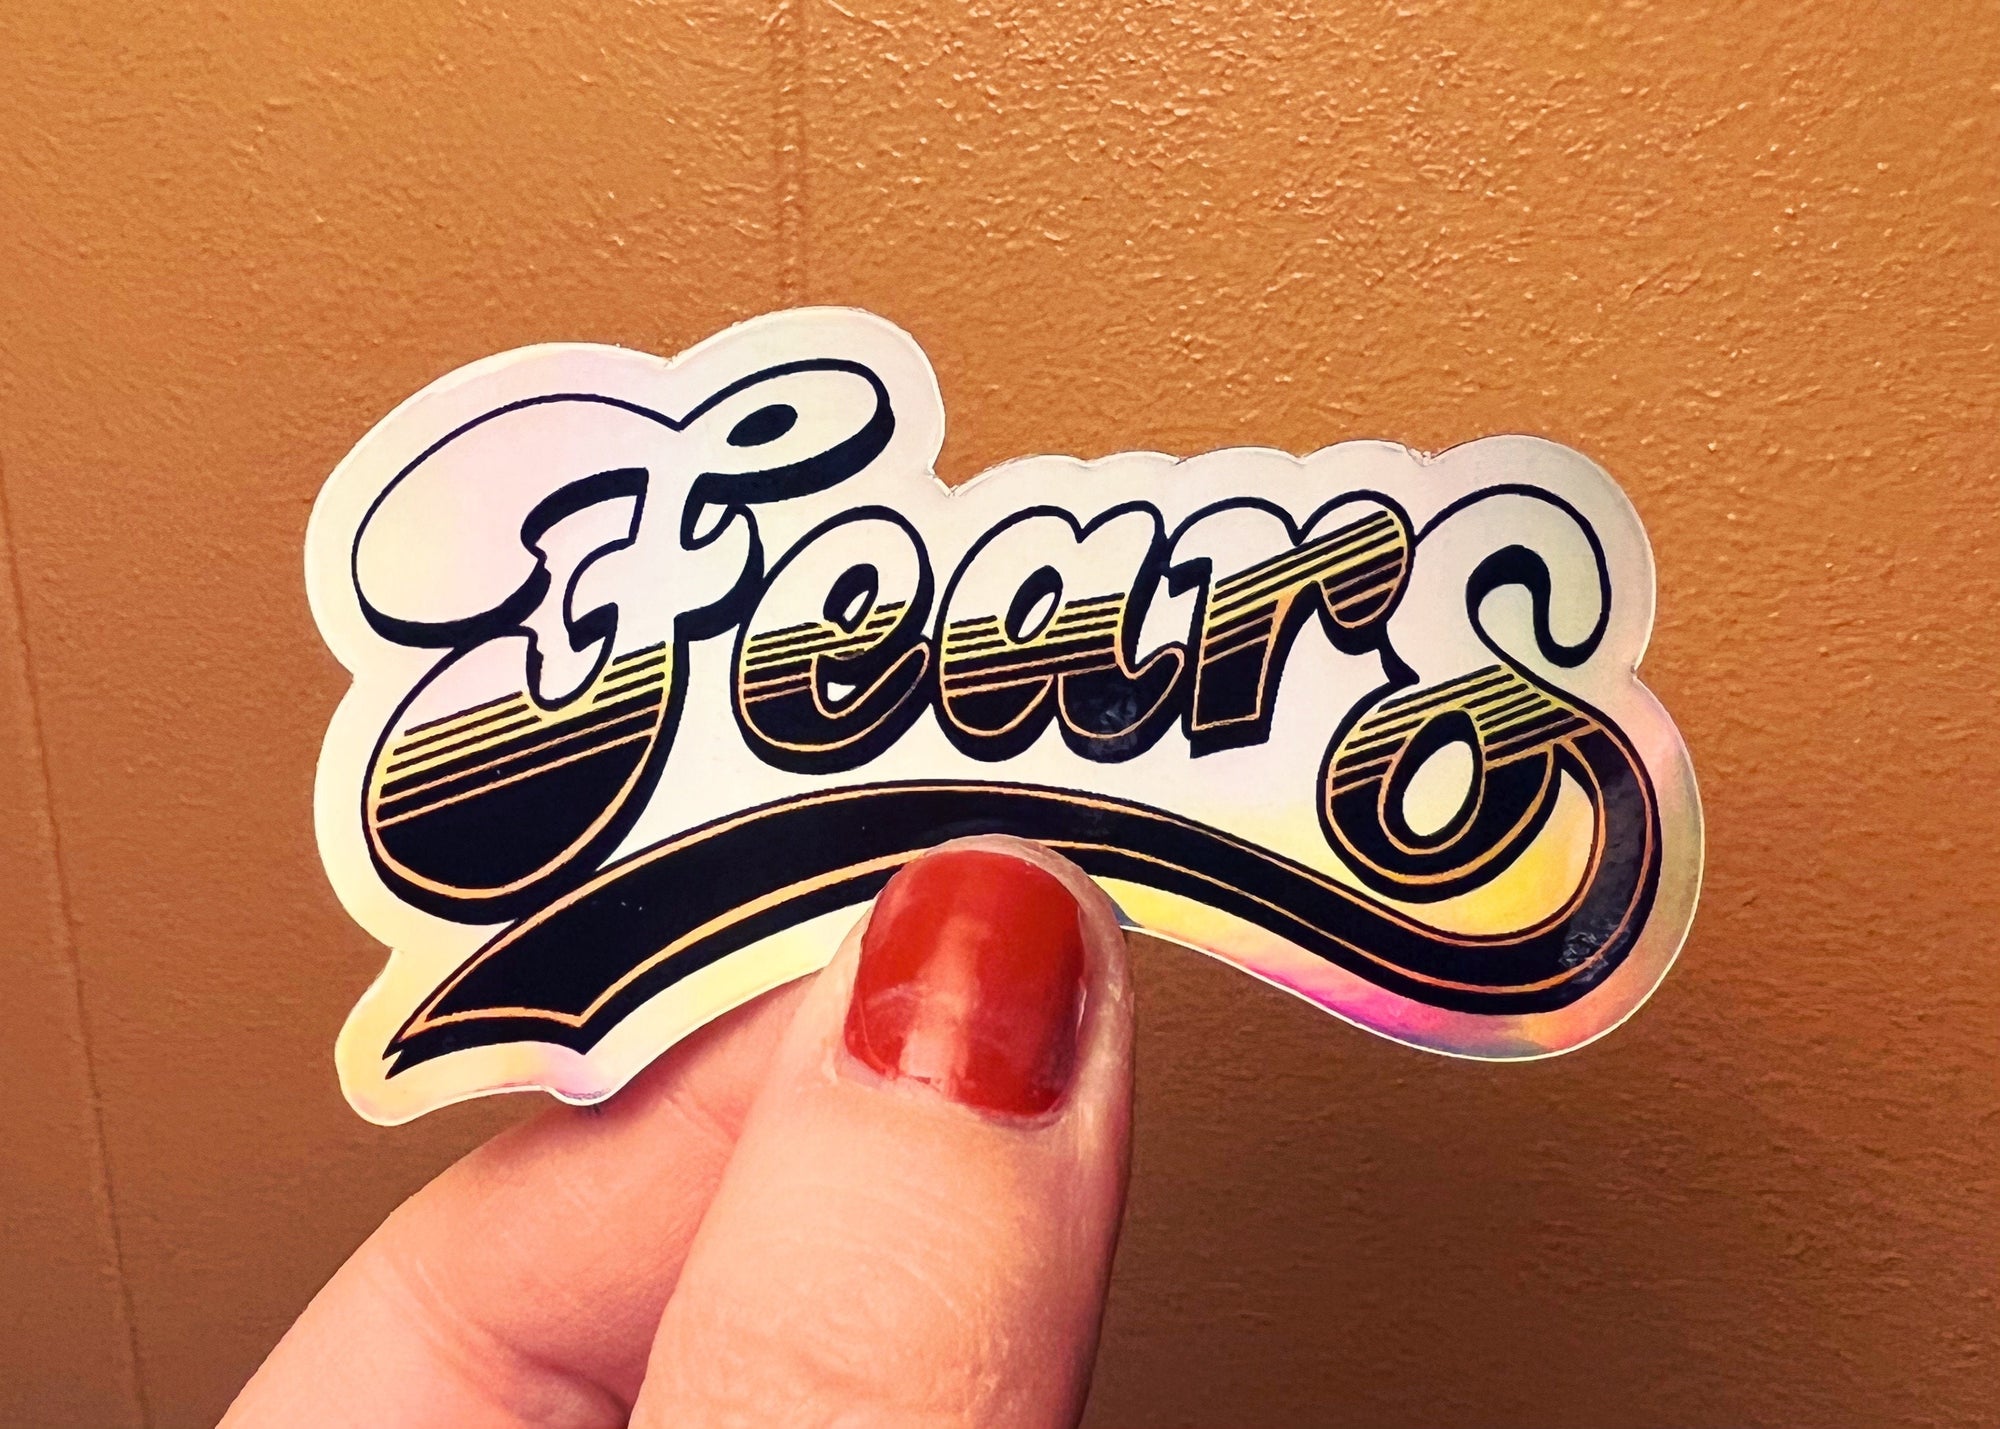 Fears x Cheers Holographic Sticker